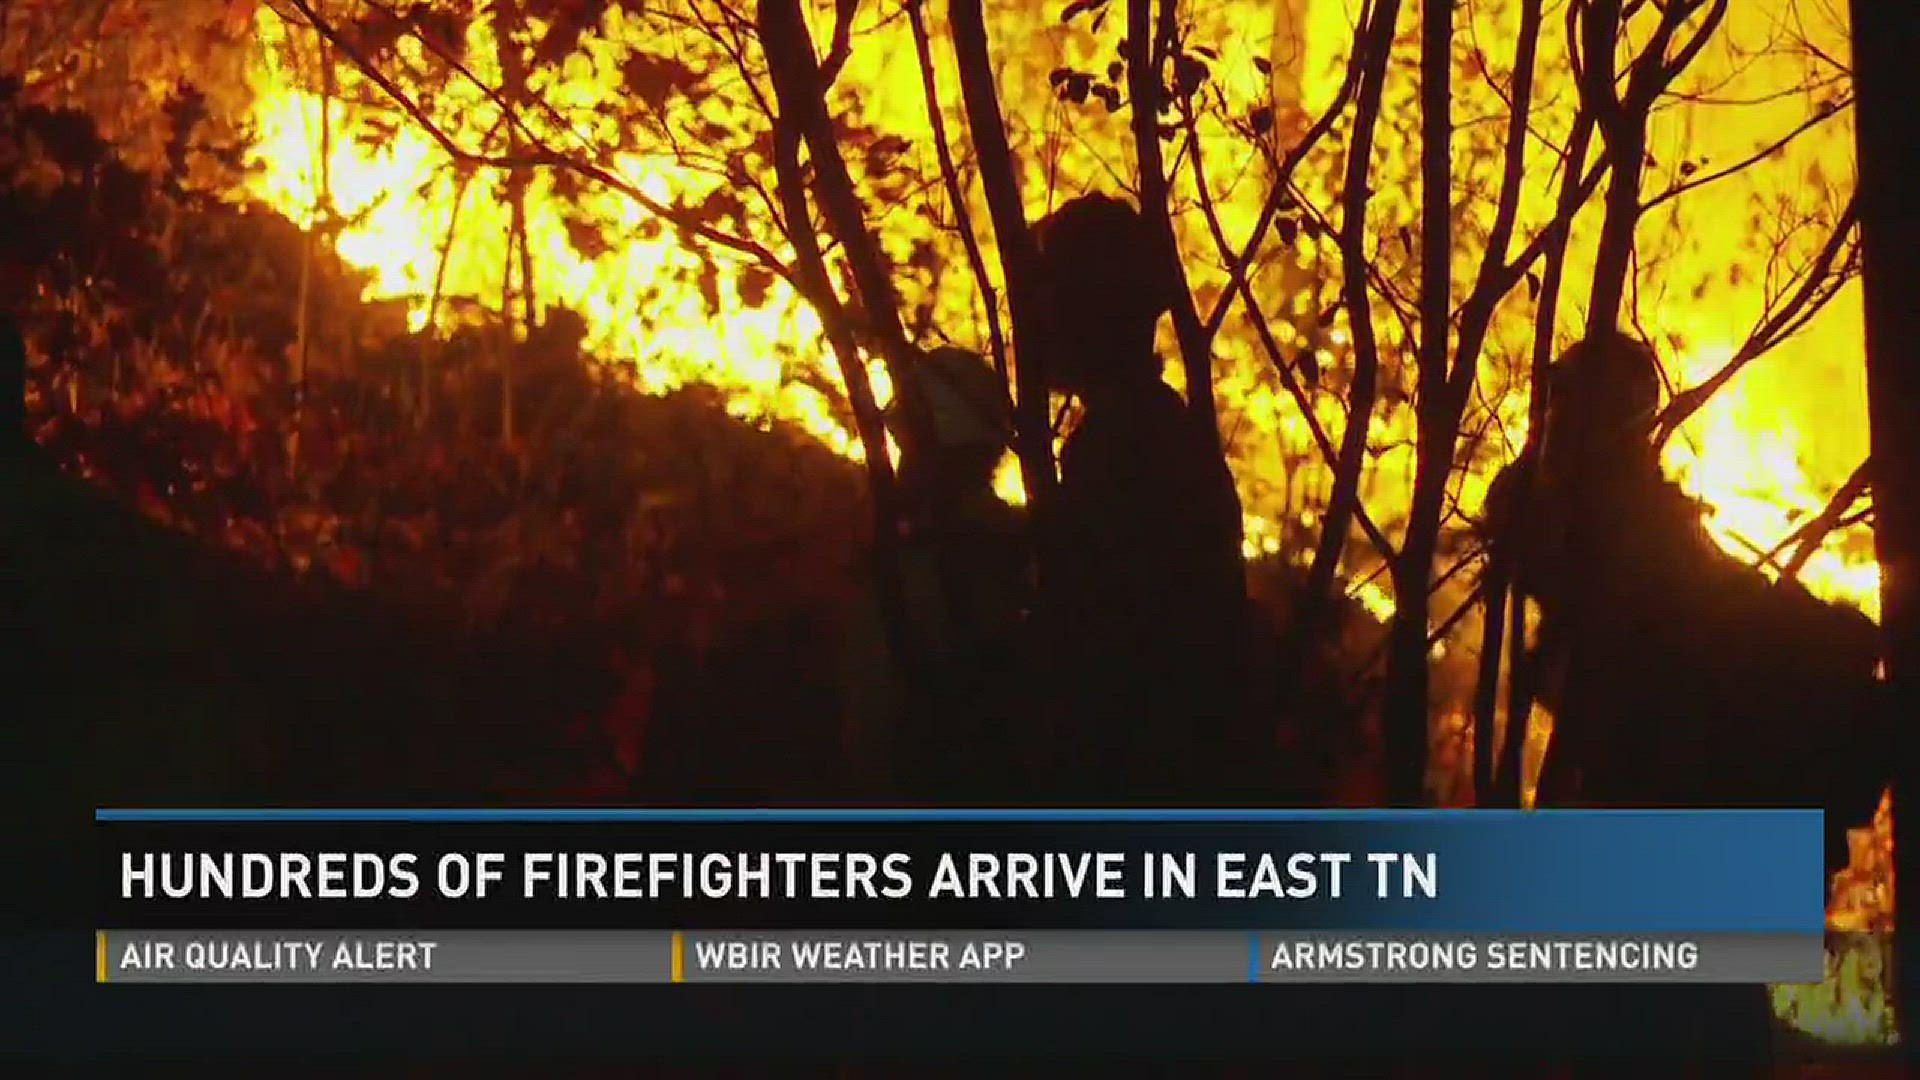 Nov. 25, 2016: More than 1,000 firefighters from across the country are in East Tennessee and the Southeast region fighting wildfires.